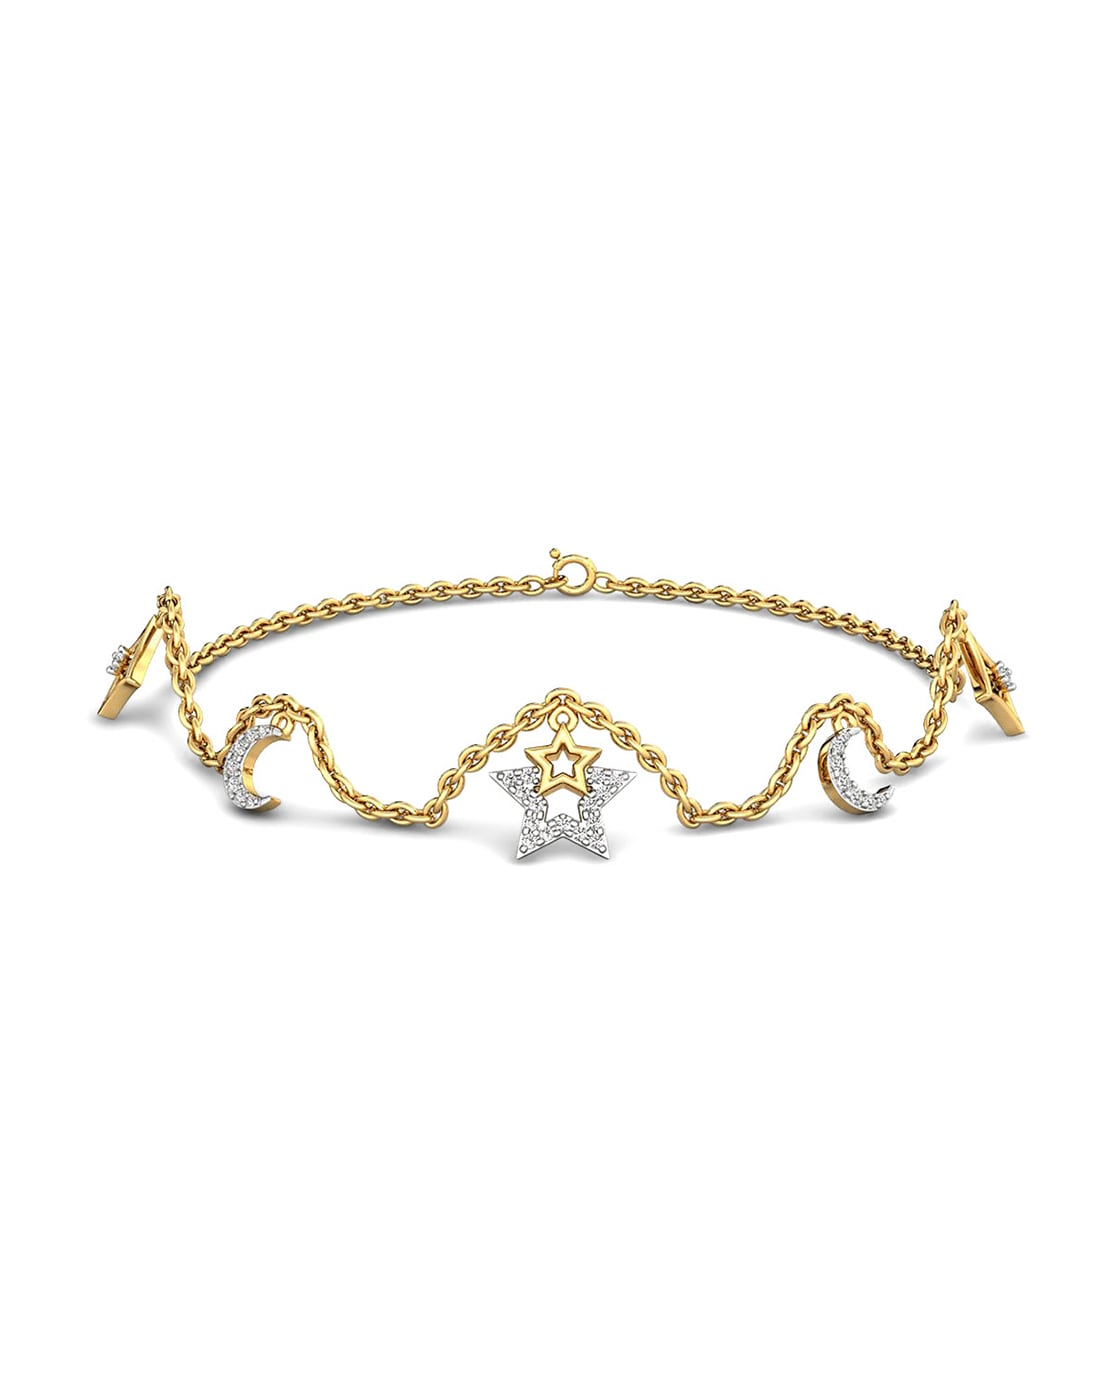 Candere By Kalyan Jewellers Yellow Gold SIIJ Diamond Starlet Bracelet For Women (Yellow Gold, 5.5)